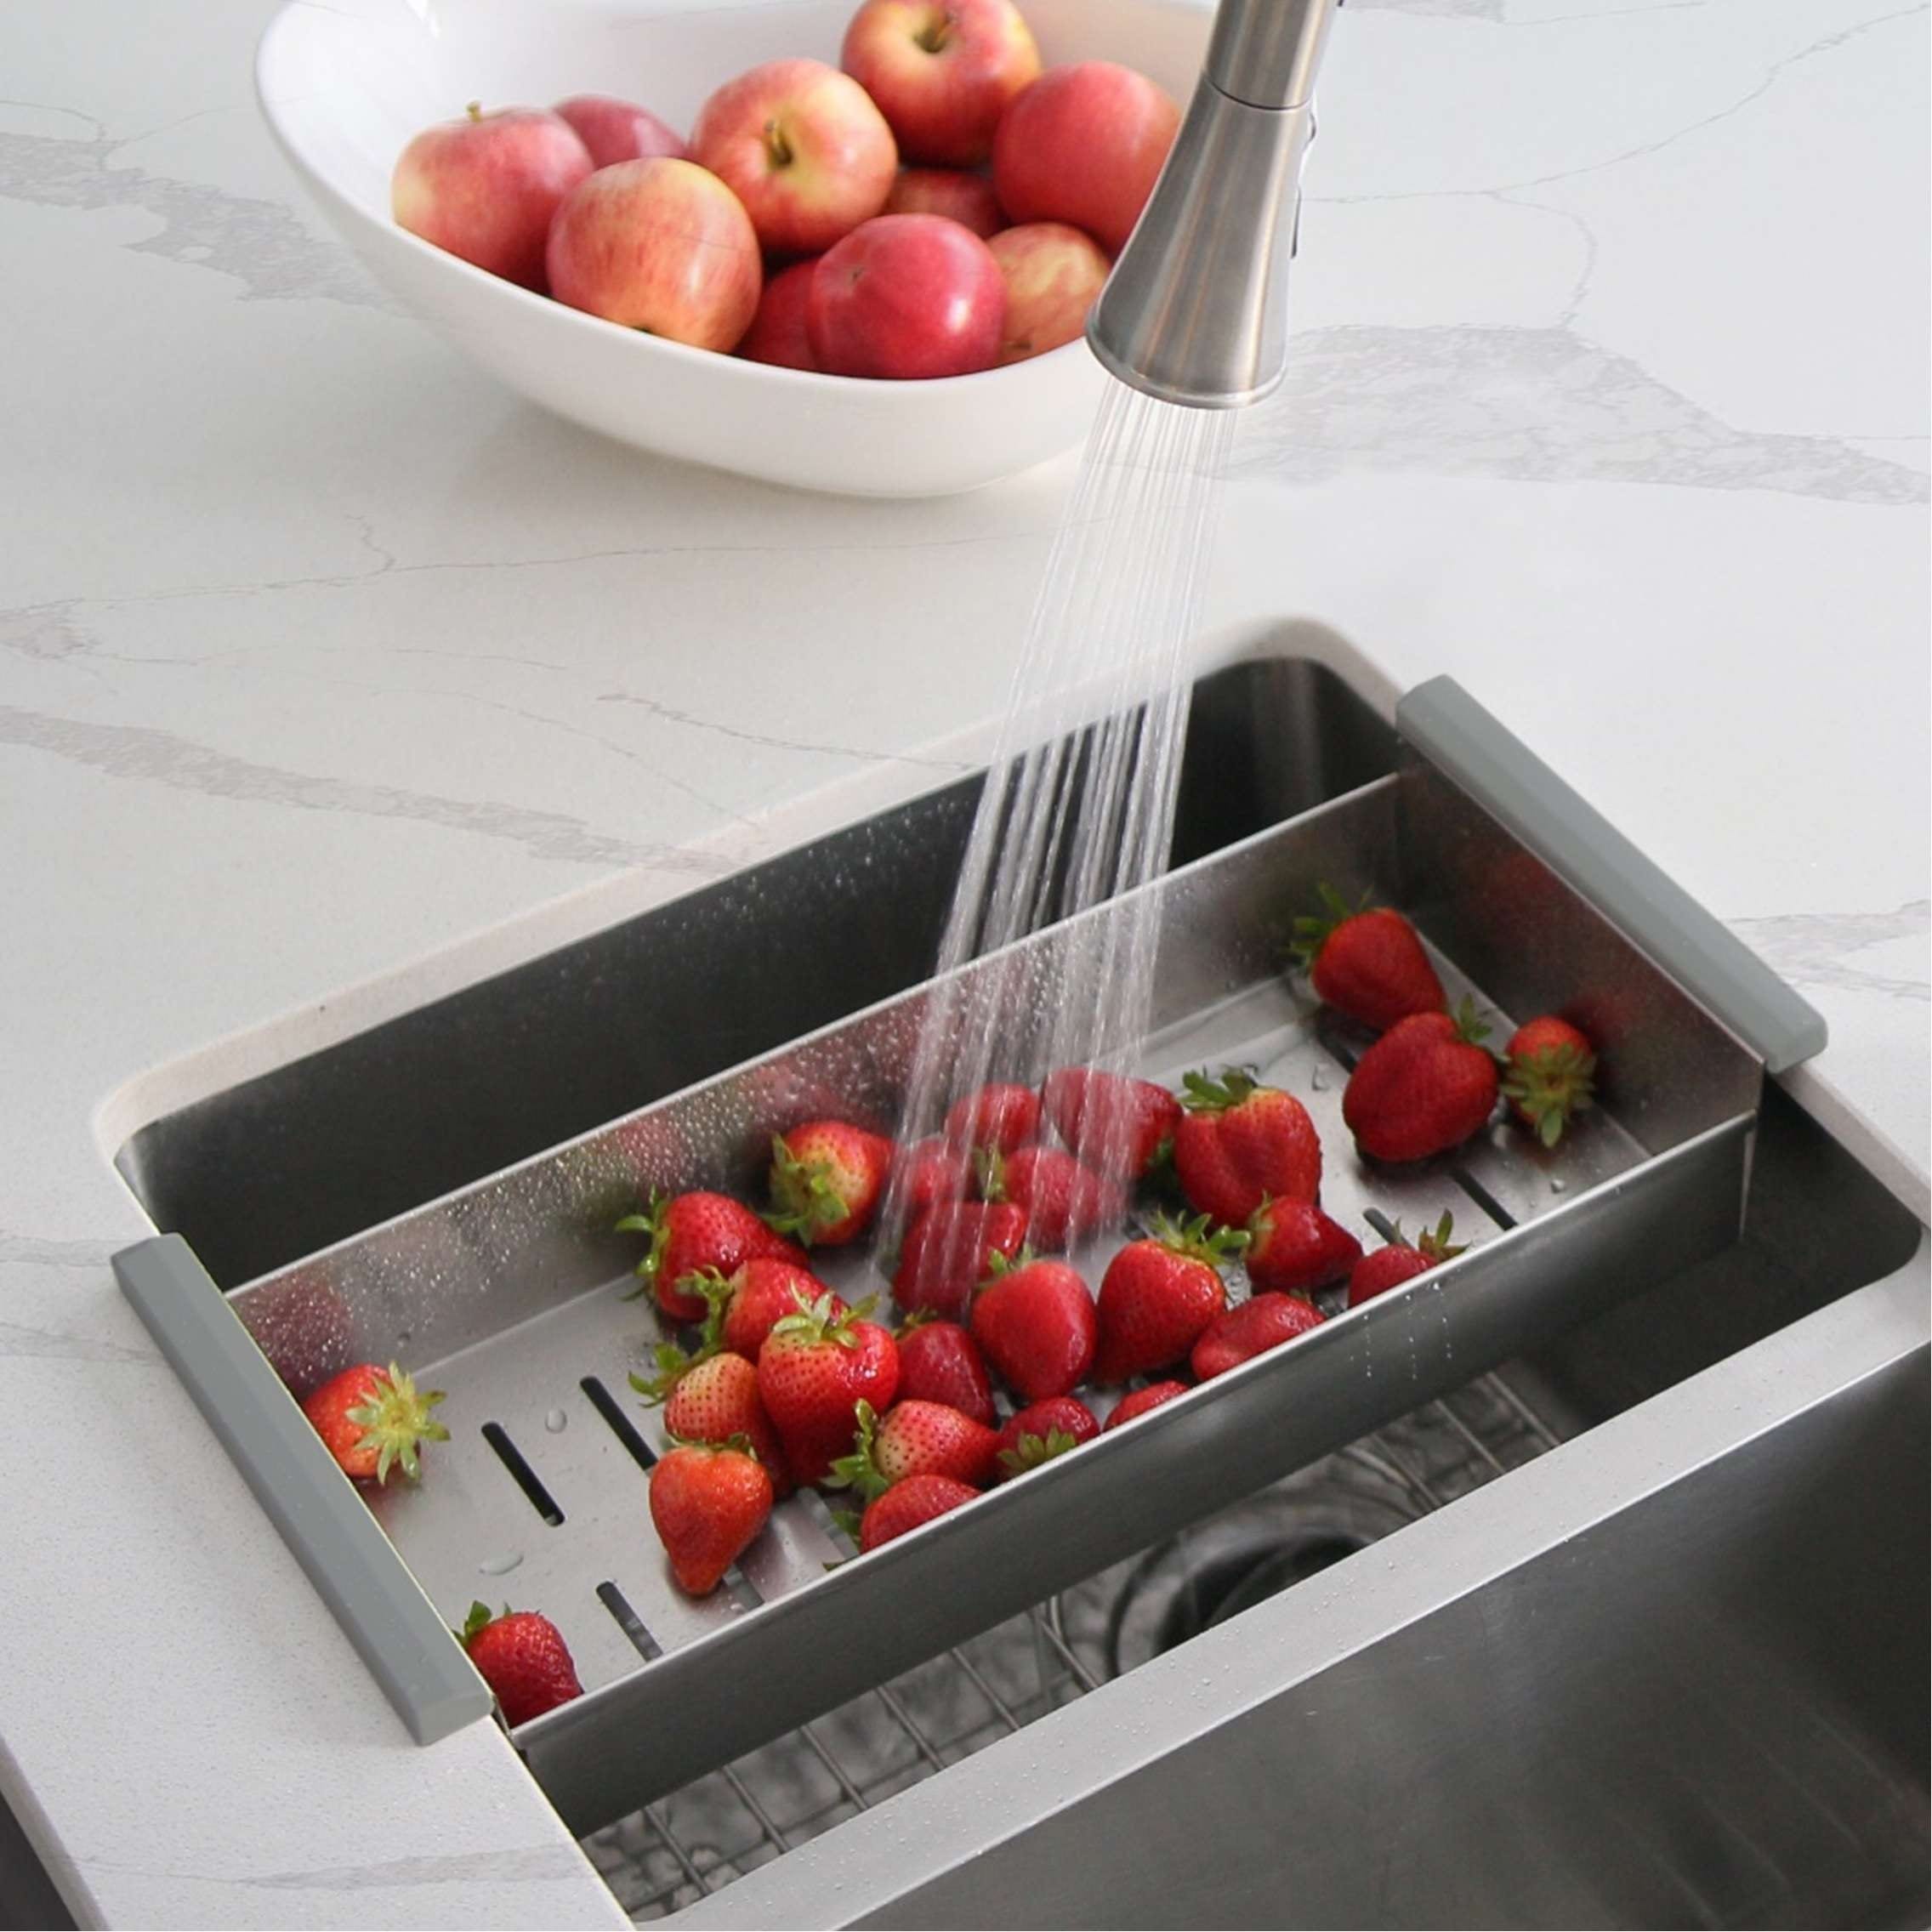 https://ak1.ostkcdn.com/images/products/is/images/direct/fea3e7c0590d6579f86dccd517bf6e5ef2aa187c/STYLISH-Stainless-Steel-Over-the-Sink-Colander-for-16%22-Sink-Opening-with-Non-slip-Handle.jpg